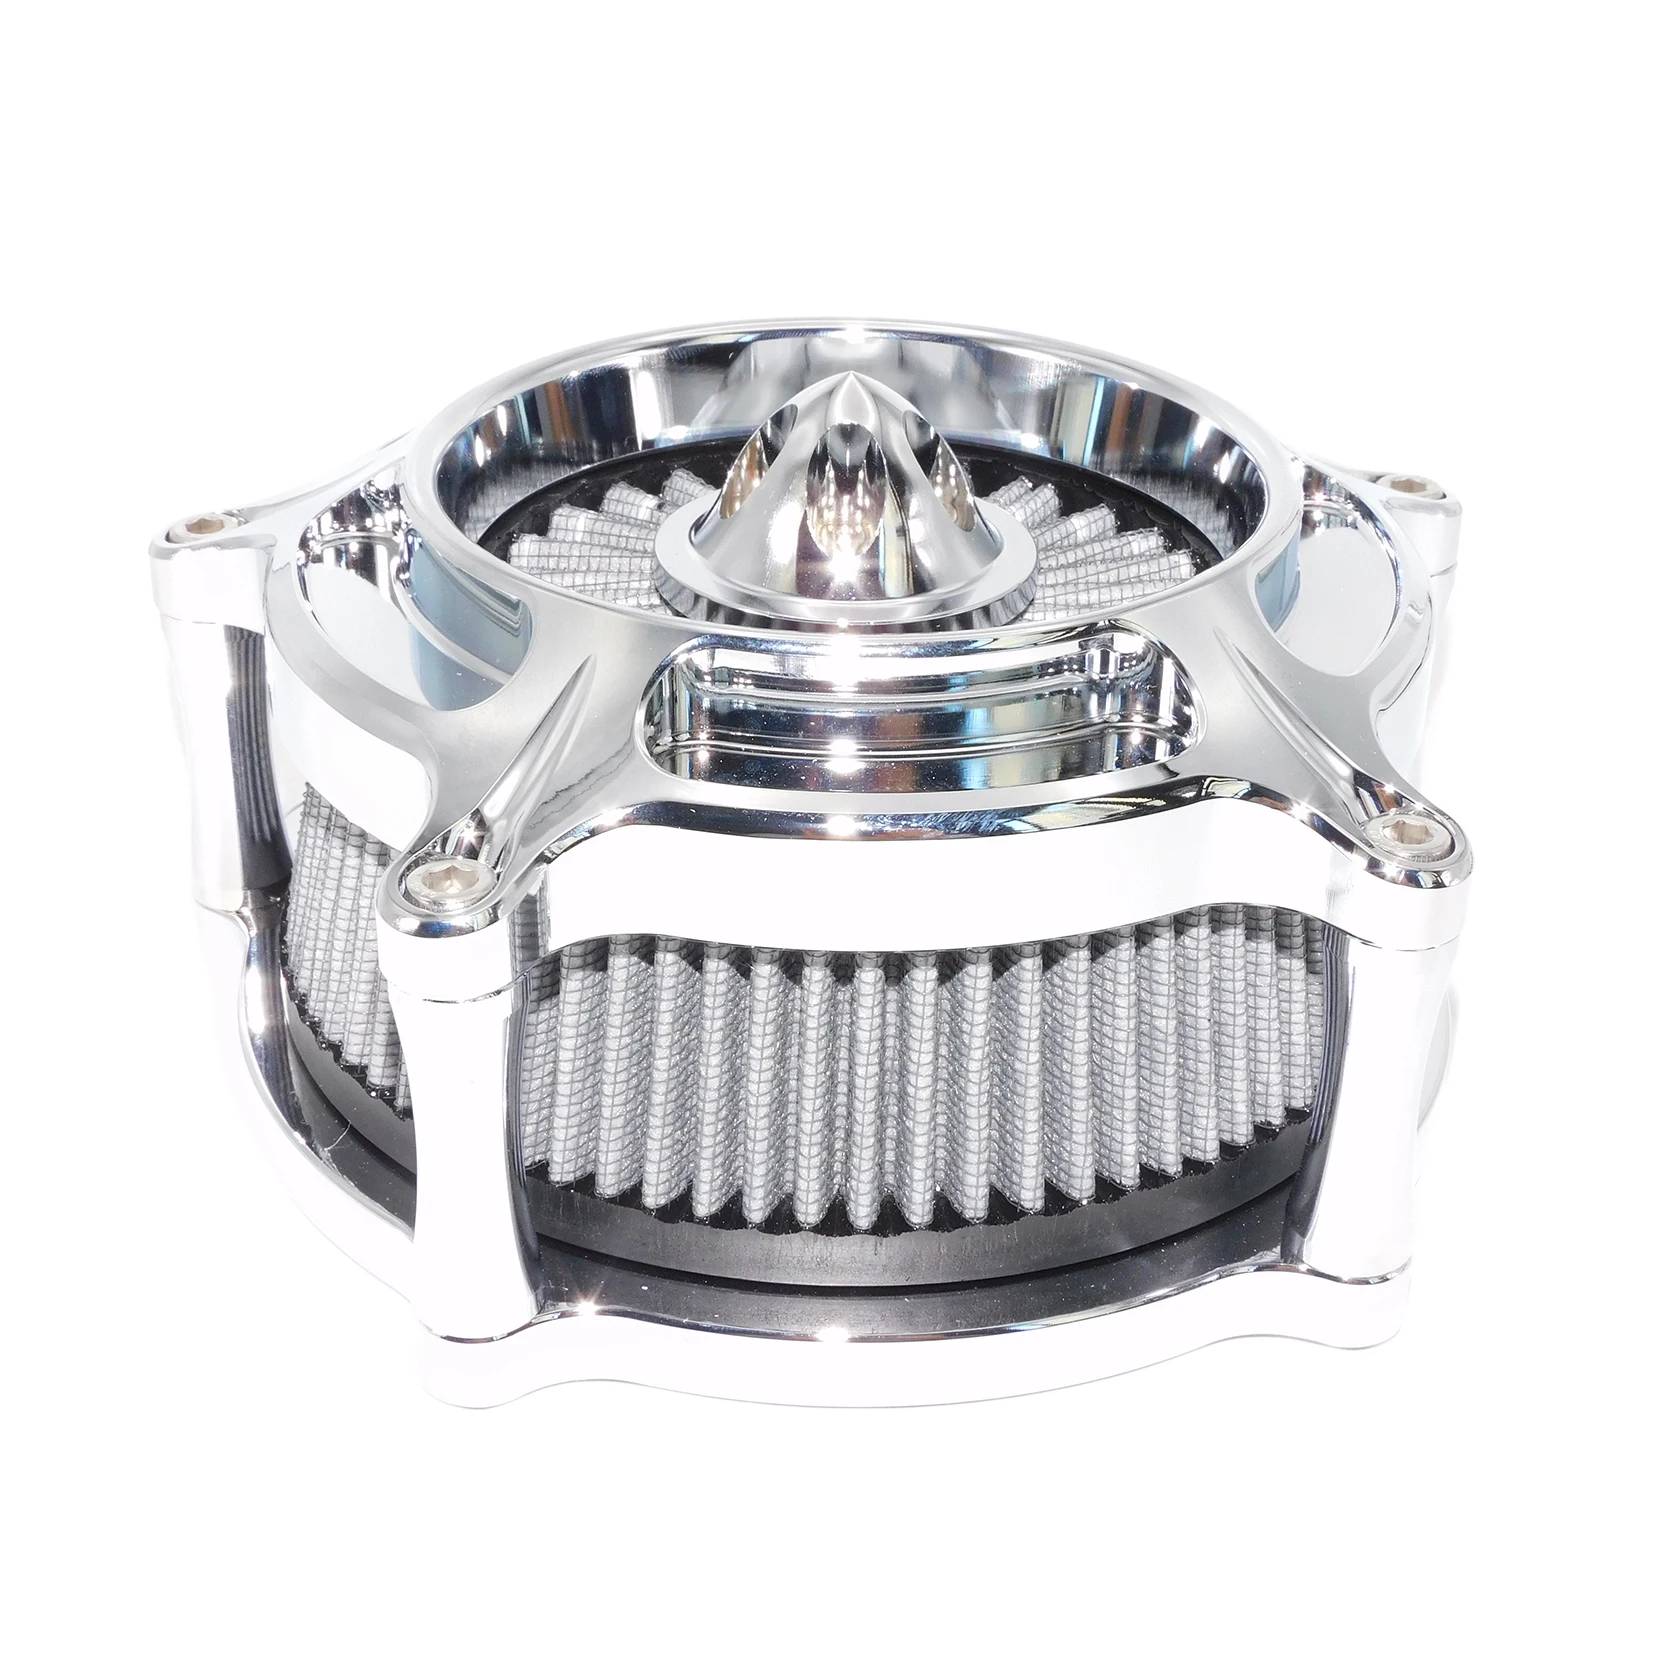 Motorcycle Air Intake Filter Chrome For Harley Sportster Iron 883